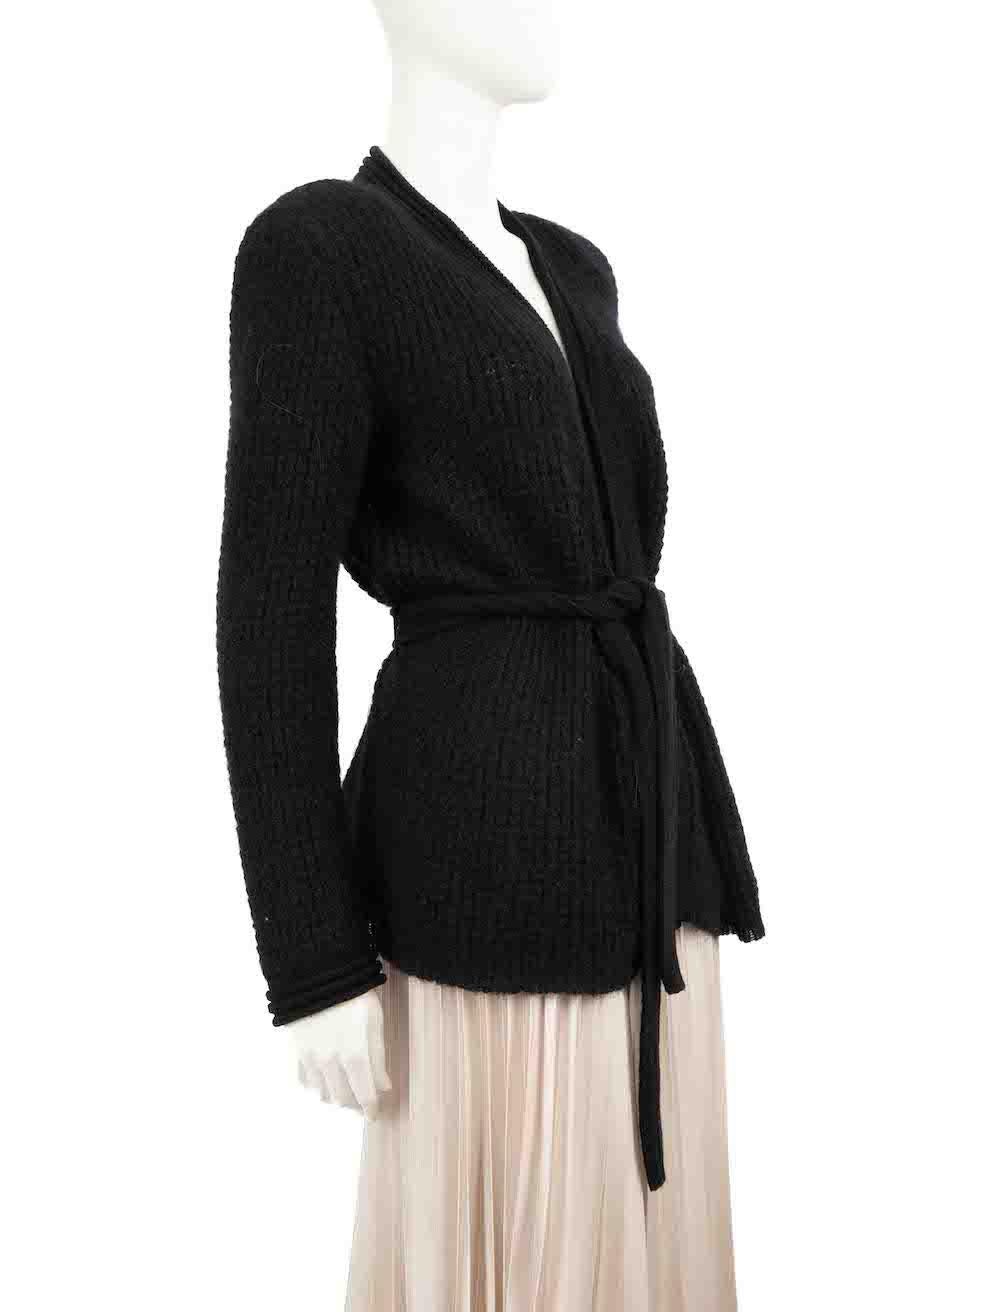 CONDITION is Very good. Hardly any visible wear to cardigan is evident on this used Balmain designer resale item.
 
 
 
 Details
 
 
 Black
 
 Mohair
 
 Knit cardigan
 
 Long sleeves
 
 Tie waist fastening
 
 Shoulder pads
 
 
 
 
 
 Made in France
